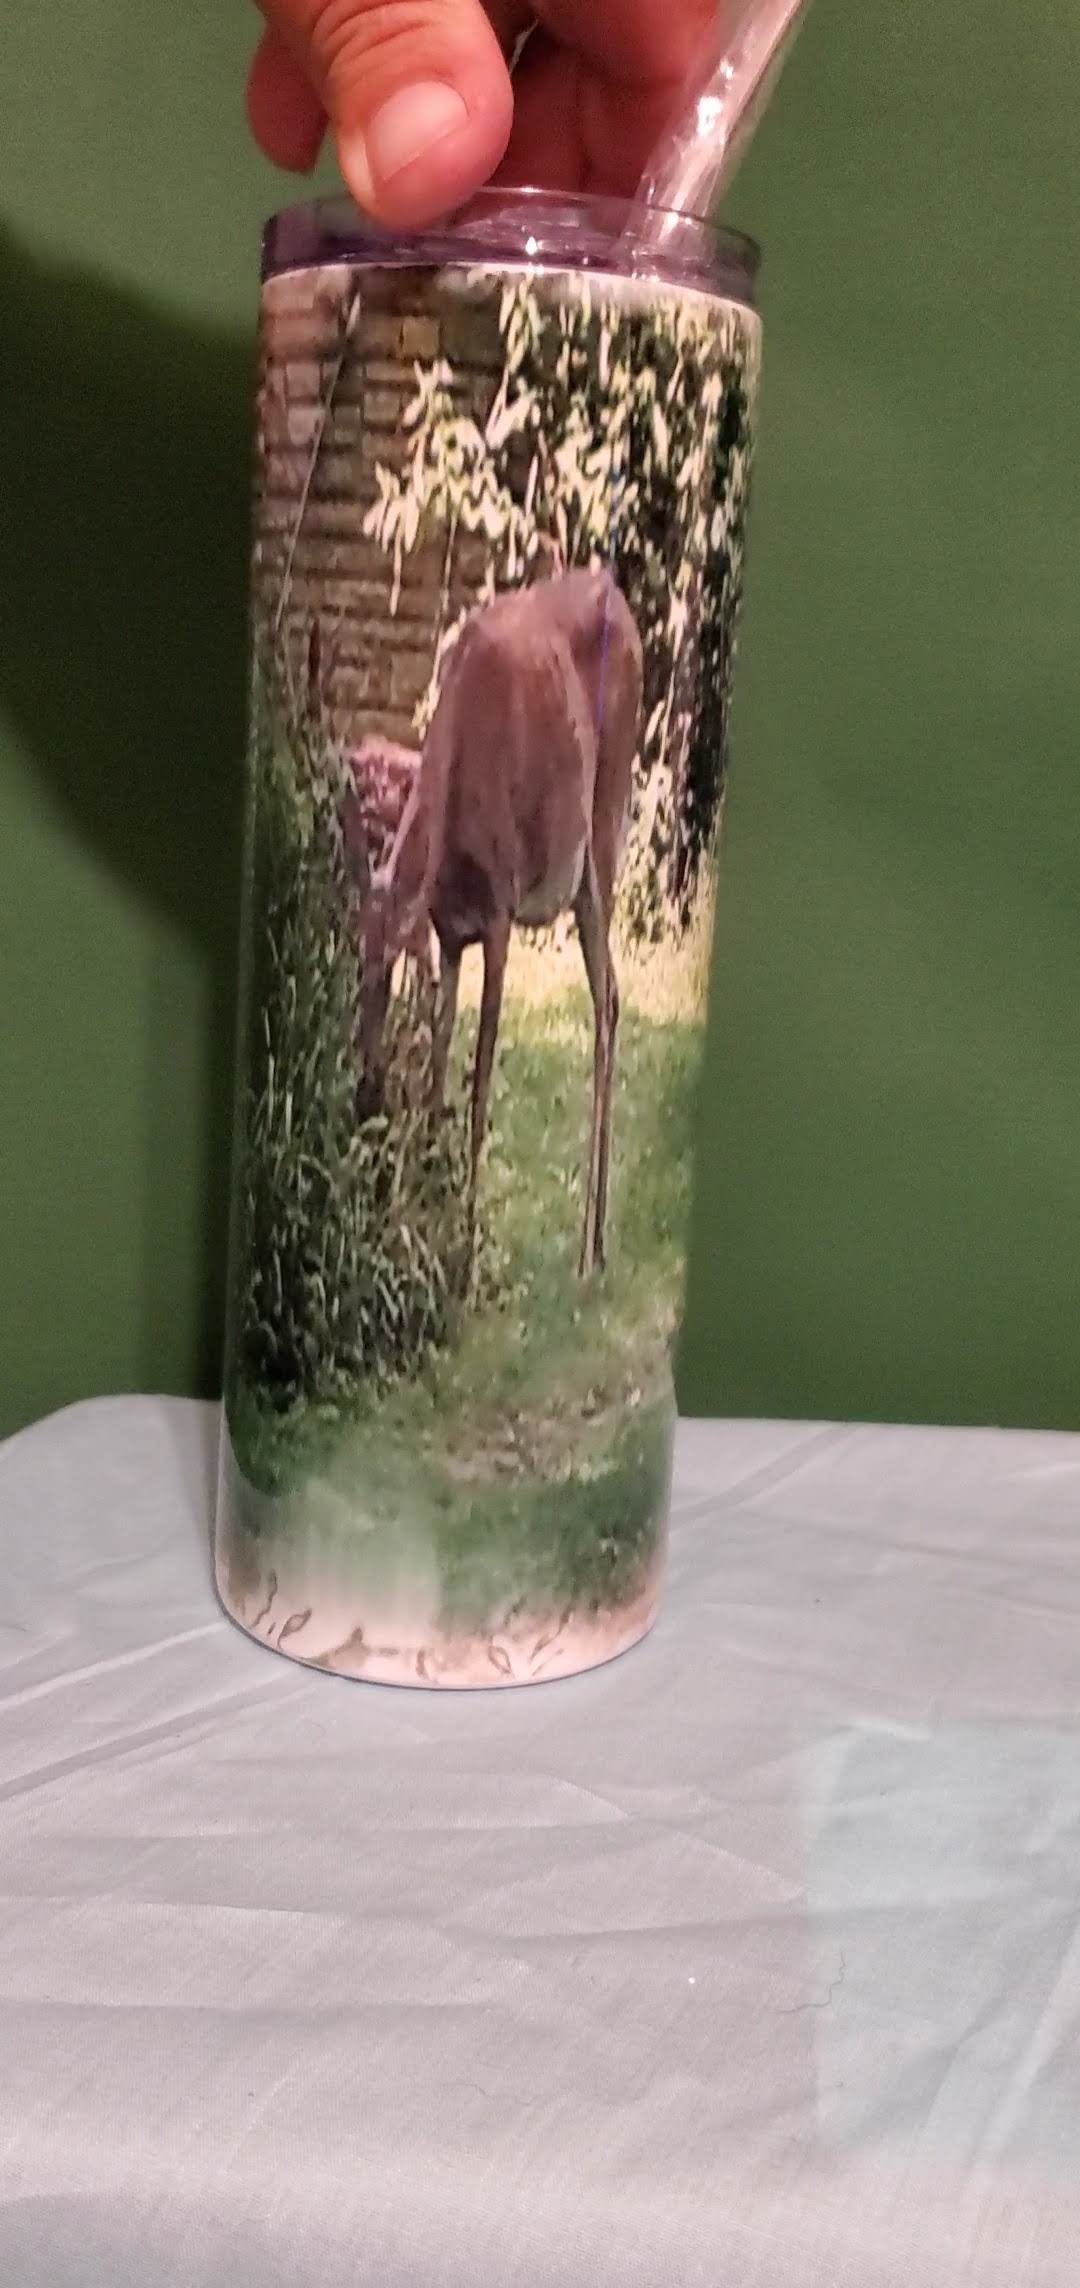 Deer feasting after the first winter frost. made with sublimation printing